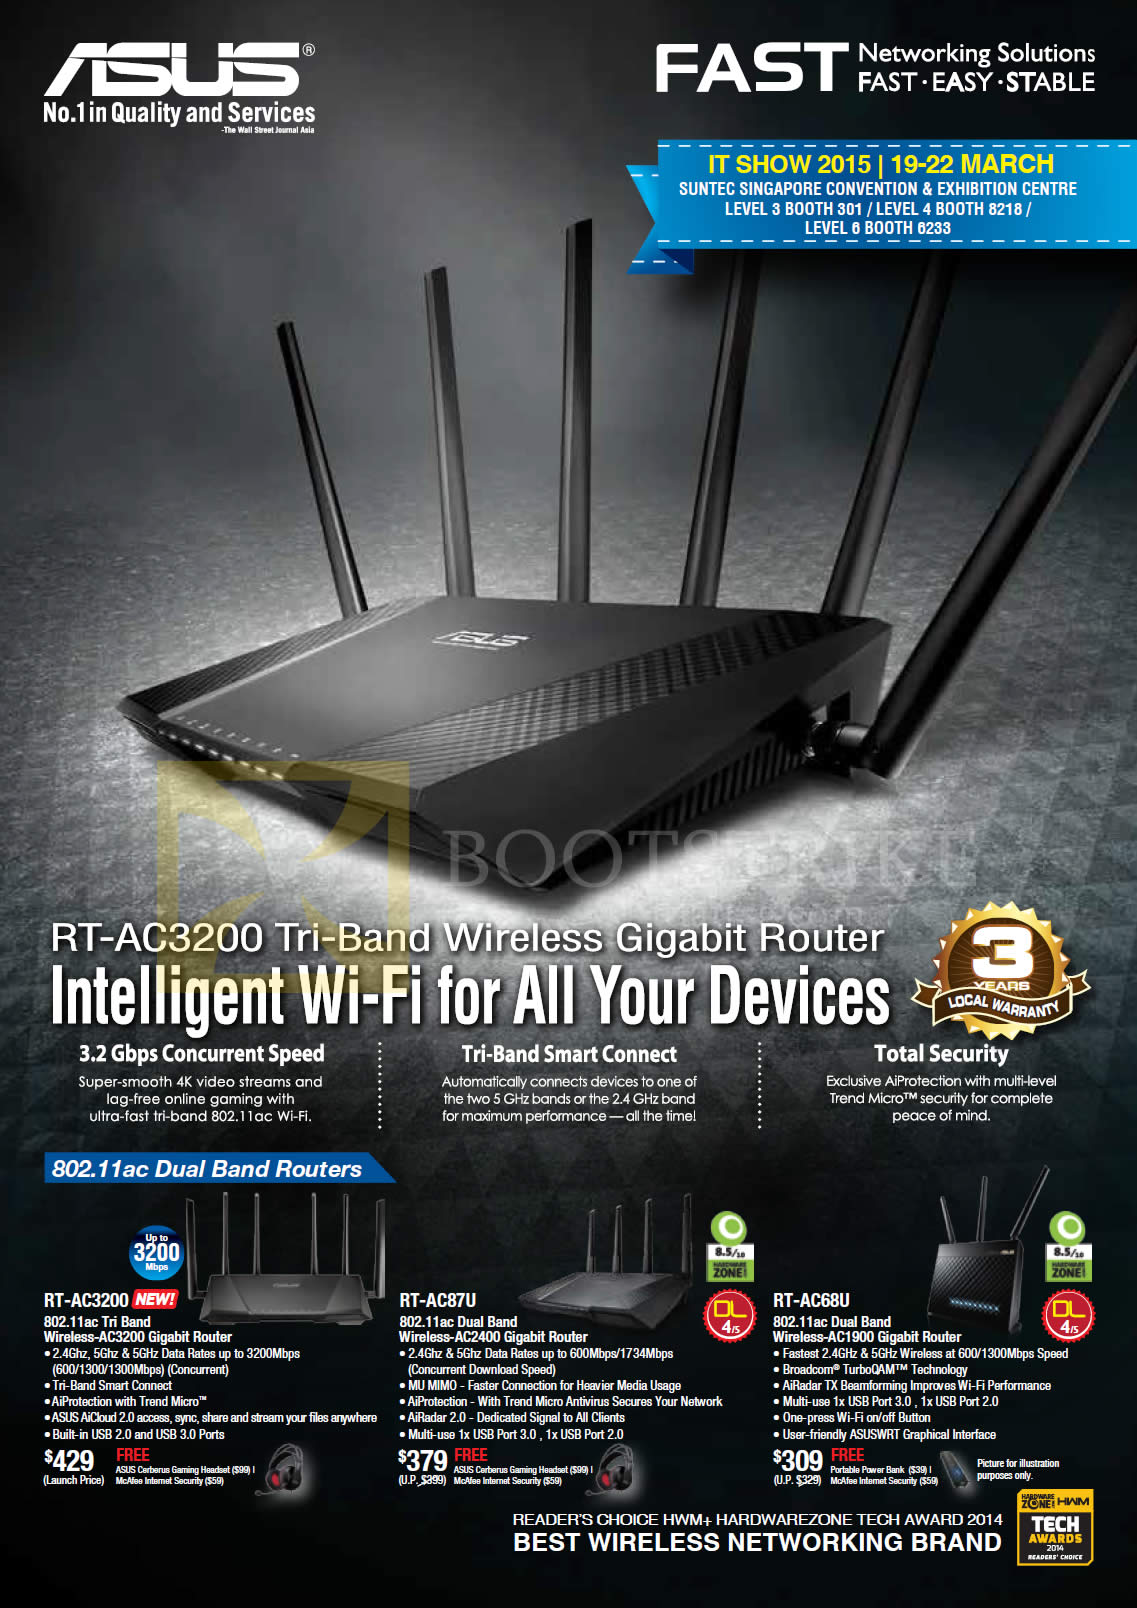 IT SHOW 2015 price list image brochure of ASUS Networking Routers Tri-Band Dual Band RT-AC3200, RT-AC87U, RT-AC68U